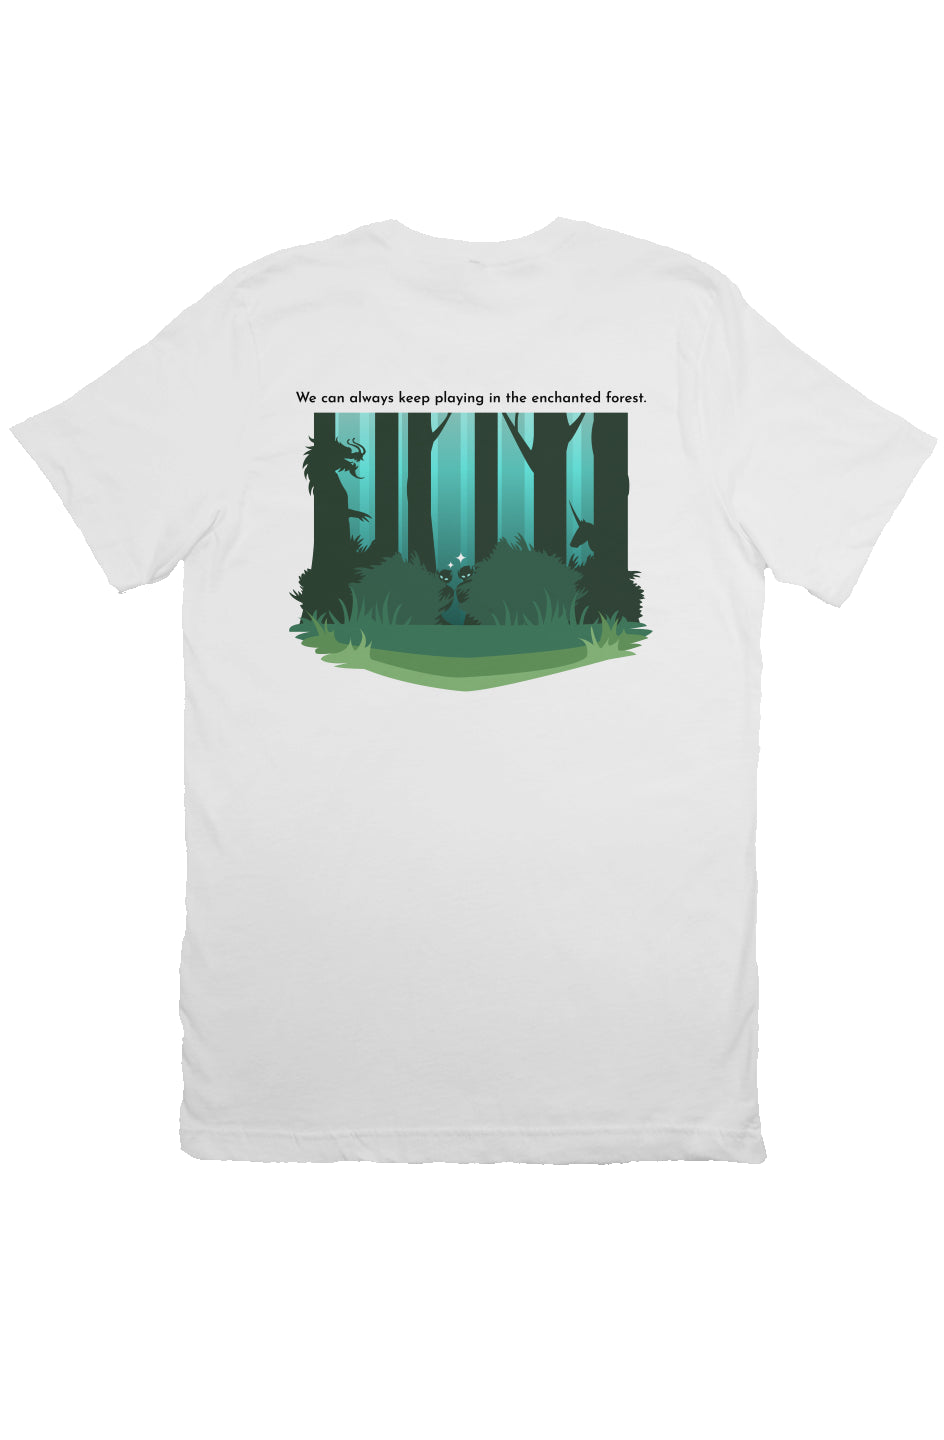 Enchanted Forest Tee - Back and Pocket